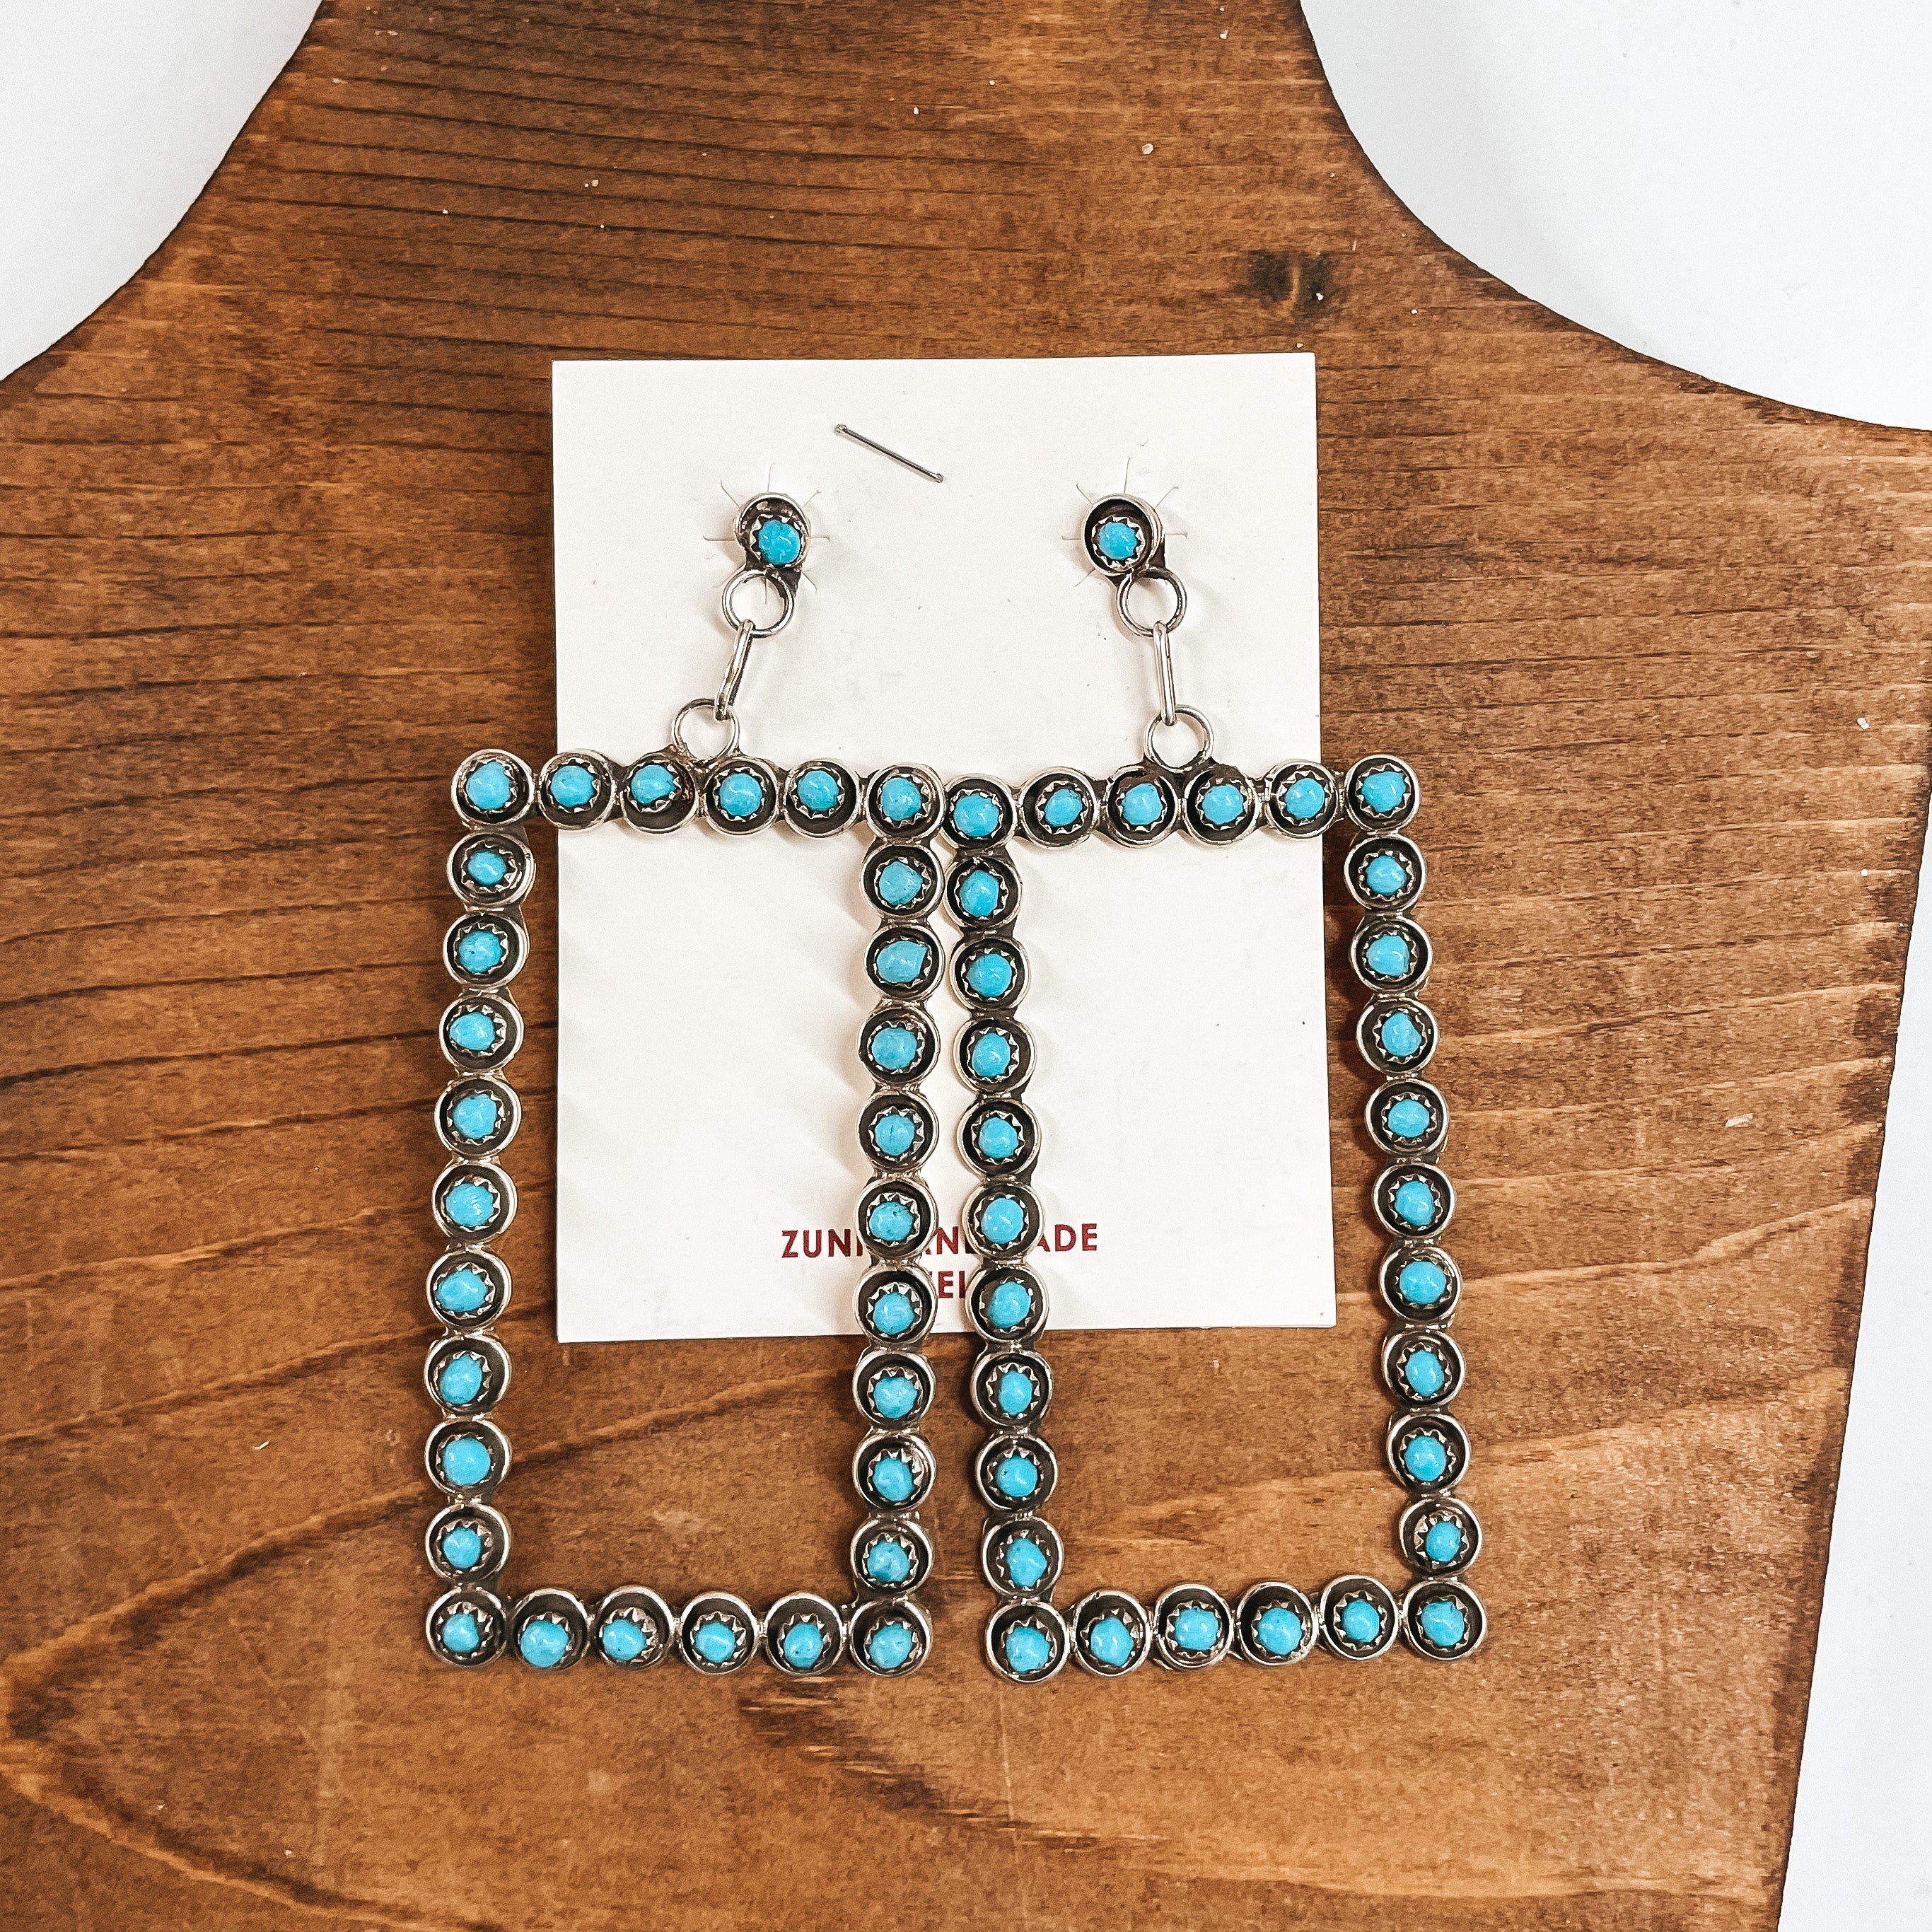 Zuni  | Zuni Handmade Sterling Silver Large Rectangle Post Stud Dangle Earrings with Turquoise Stones - Giddy Up Glamour Boutique